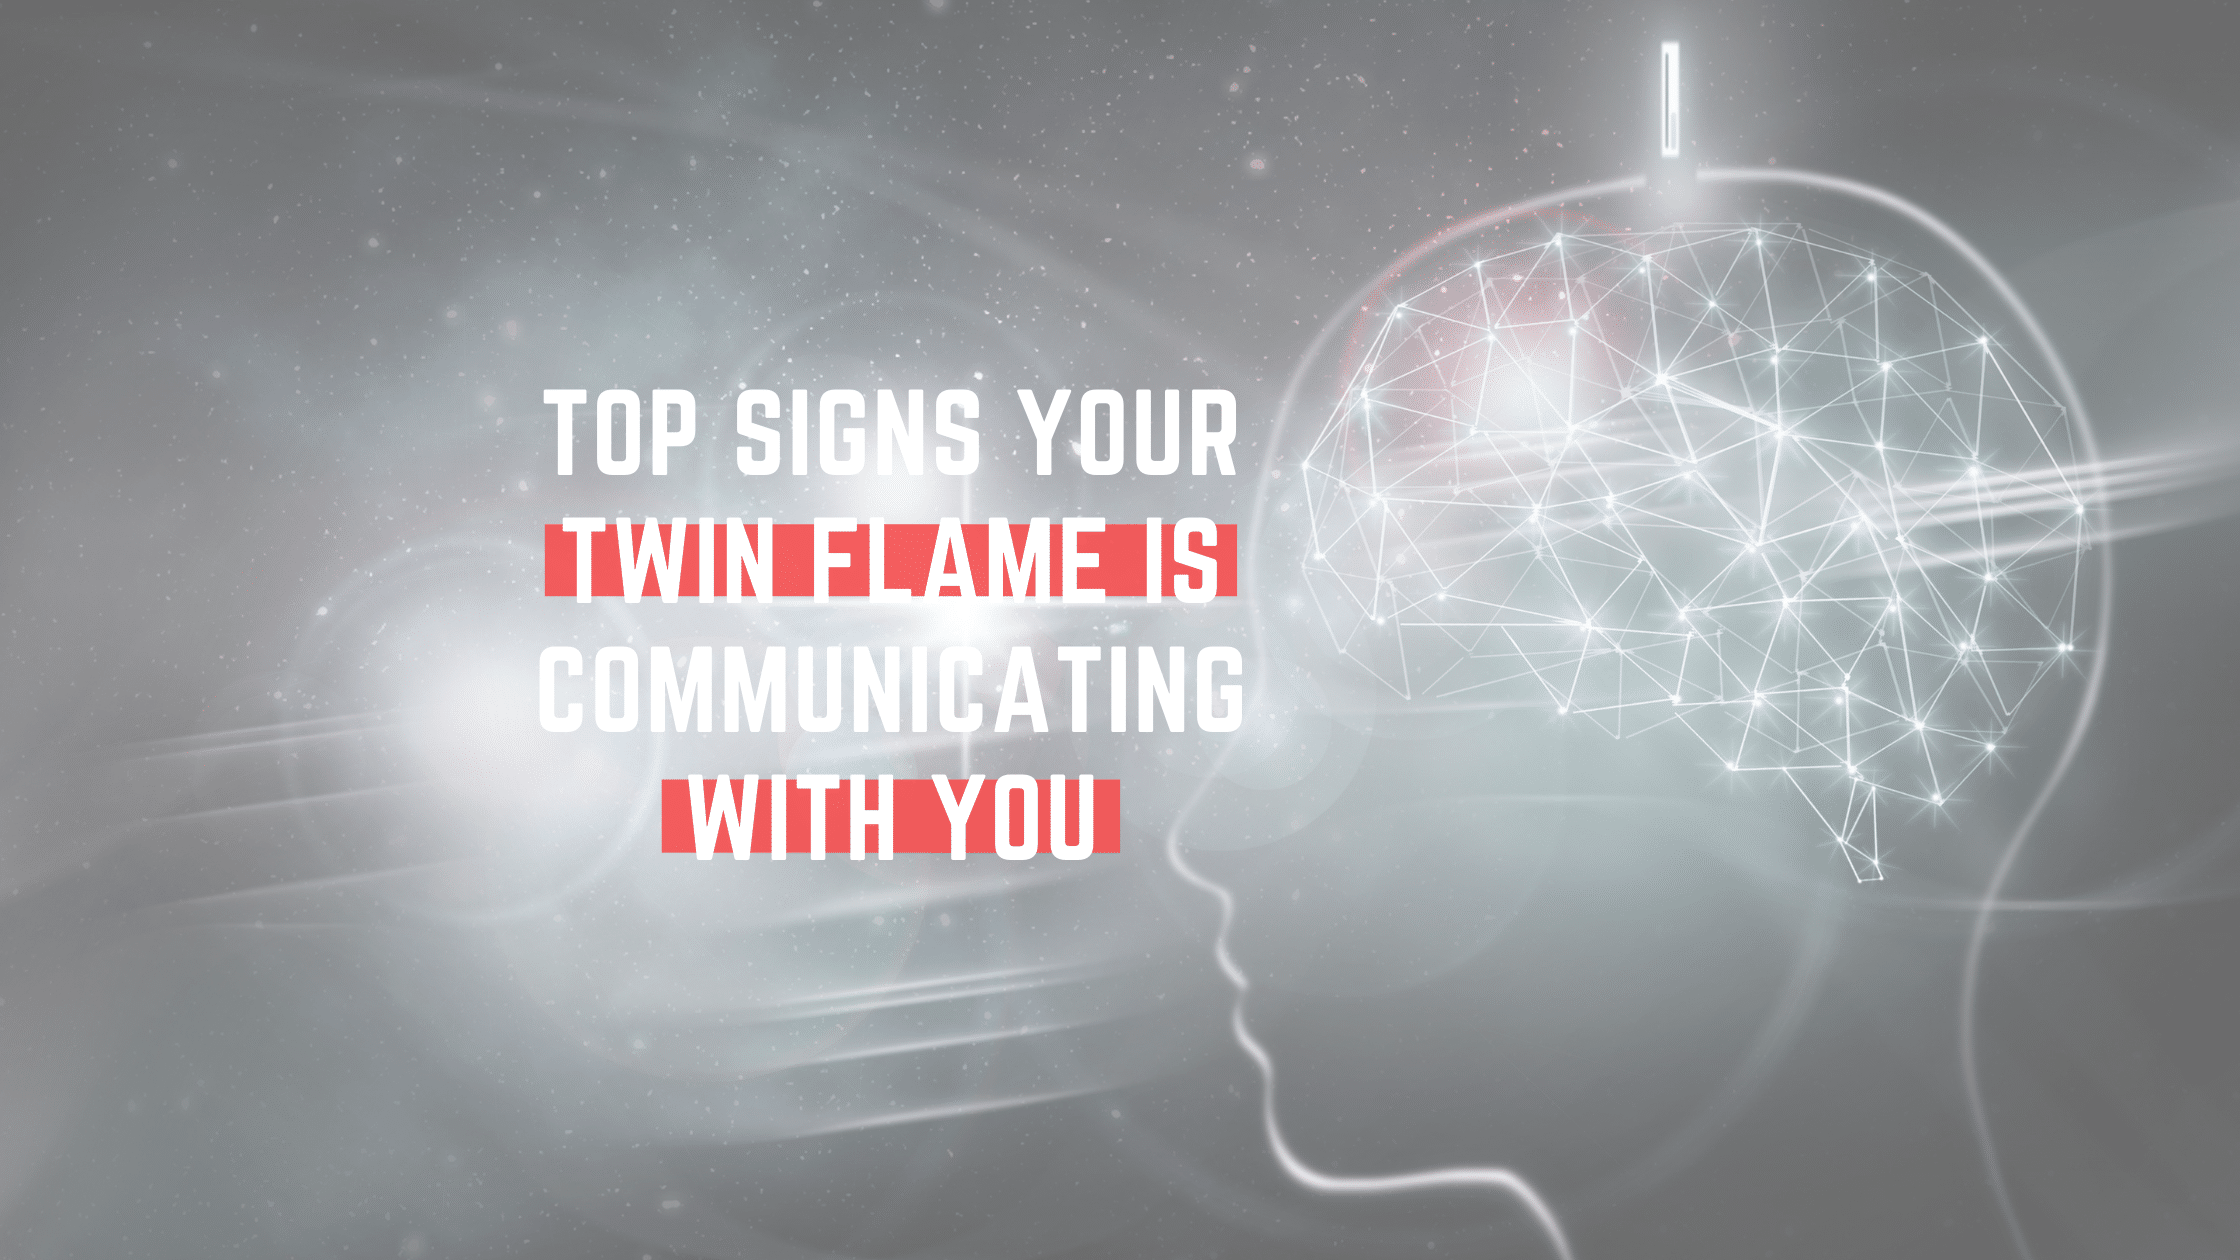 Signs your twin flame is communicating with you